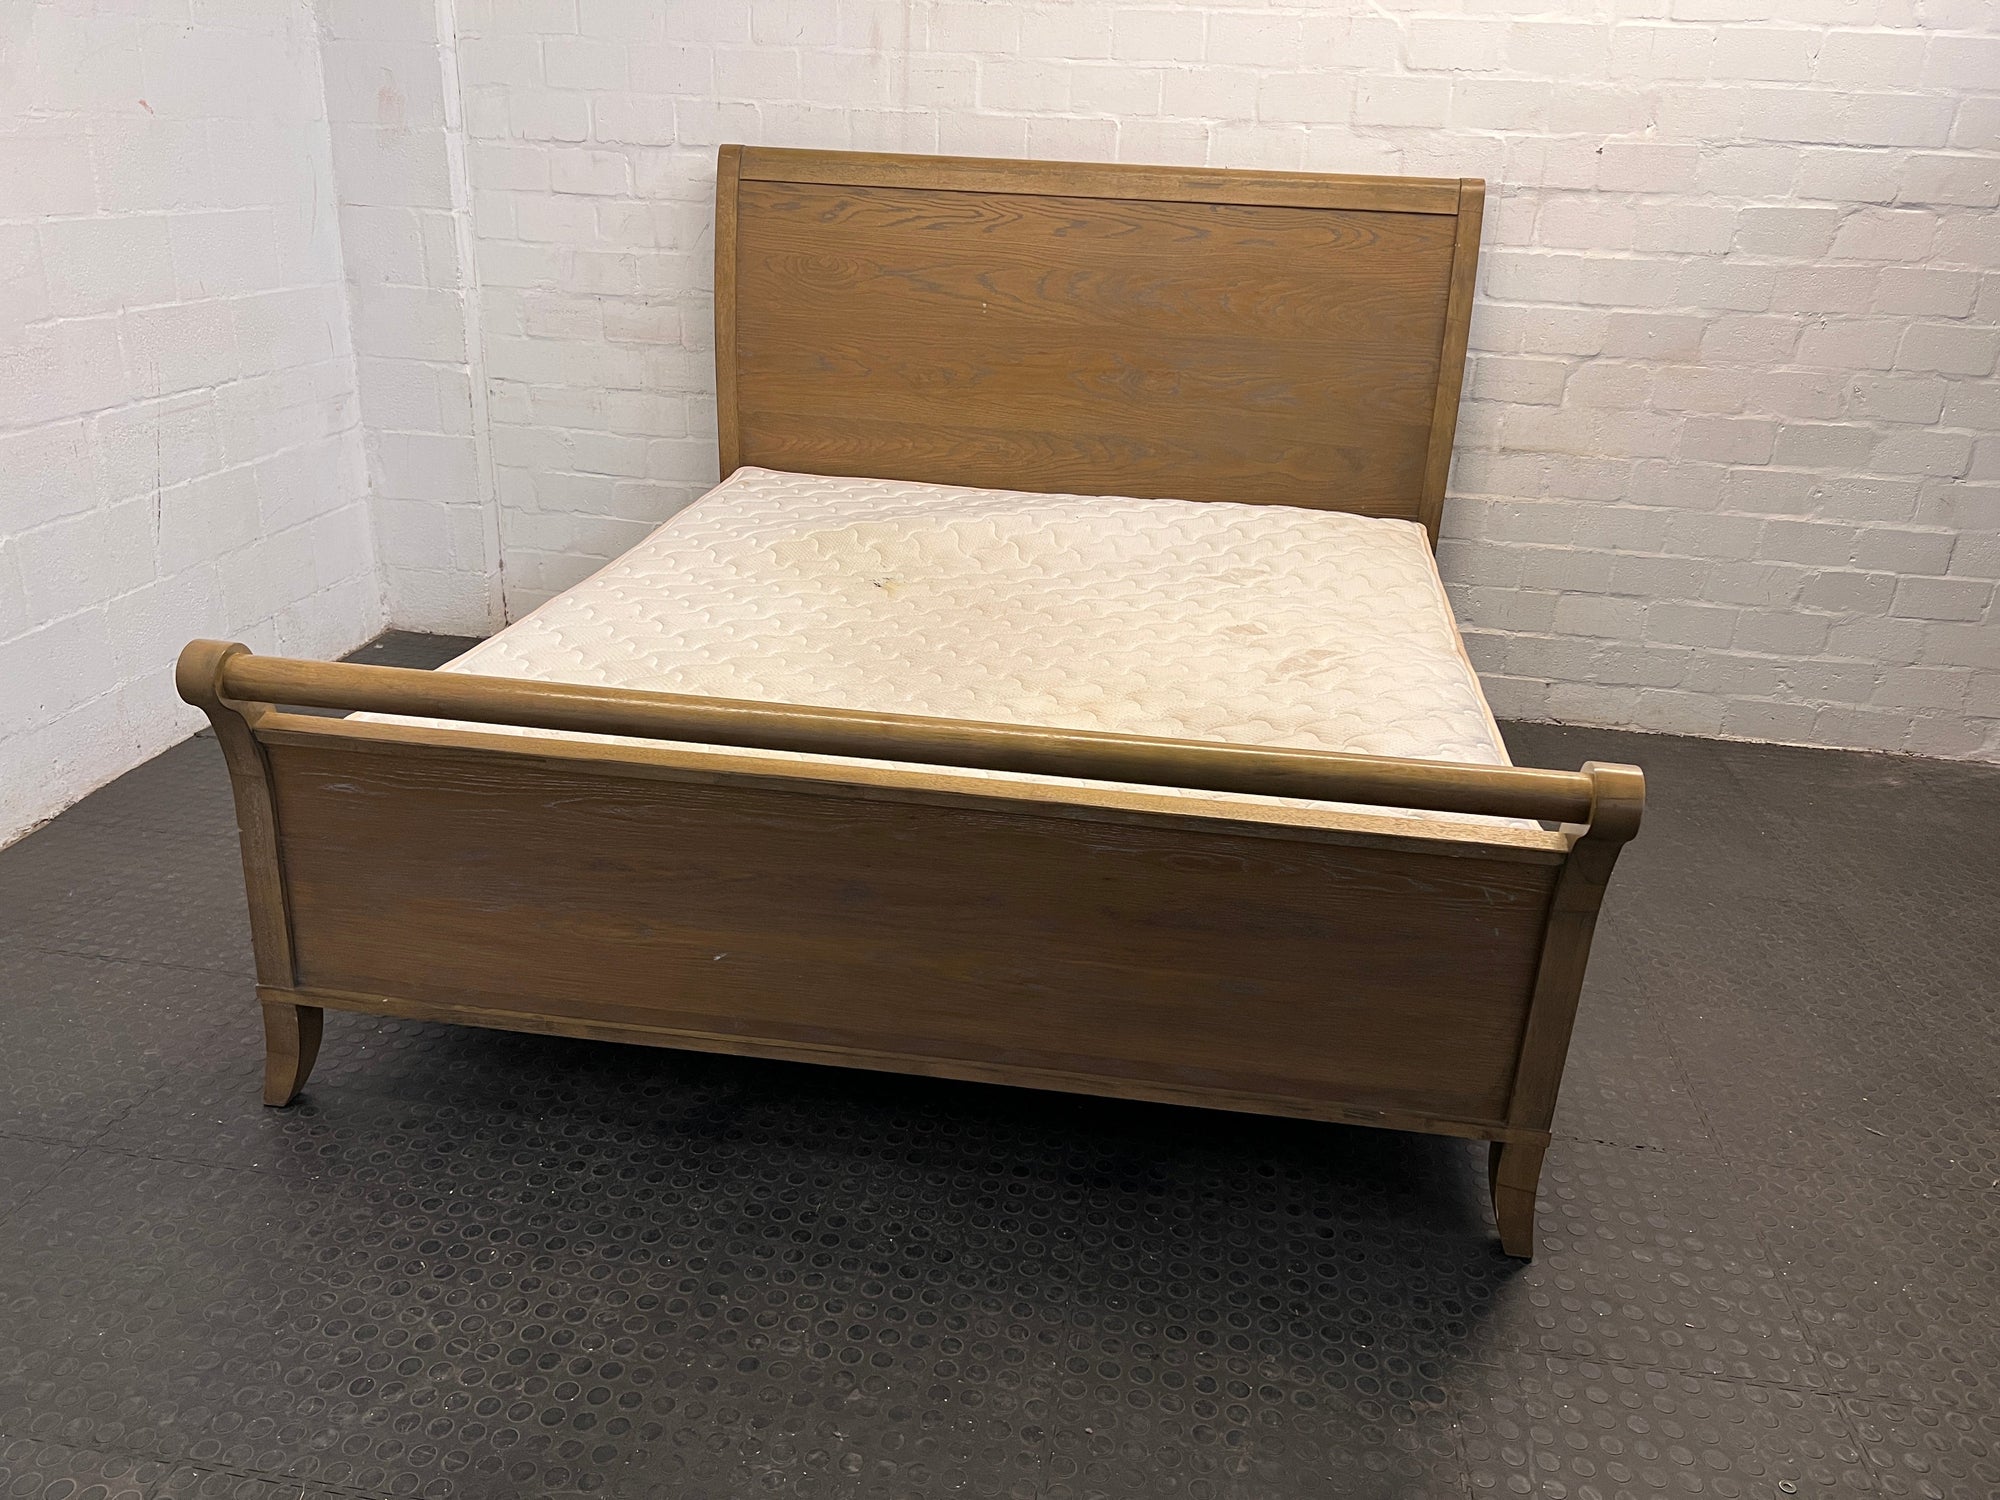 King Sleigh Bed Bed with Slumberland Mattress